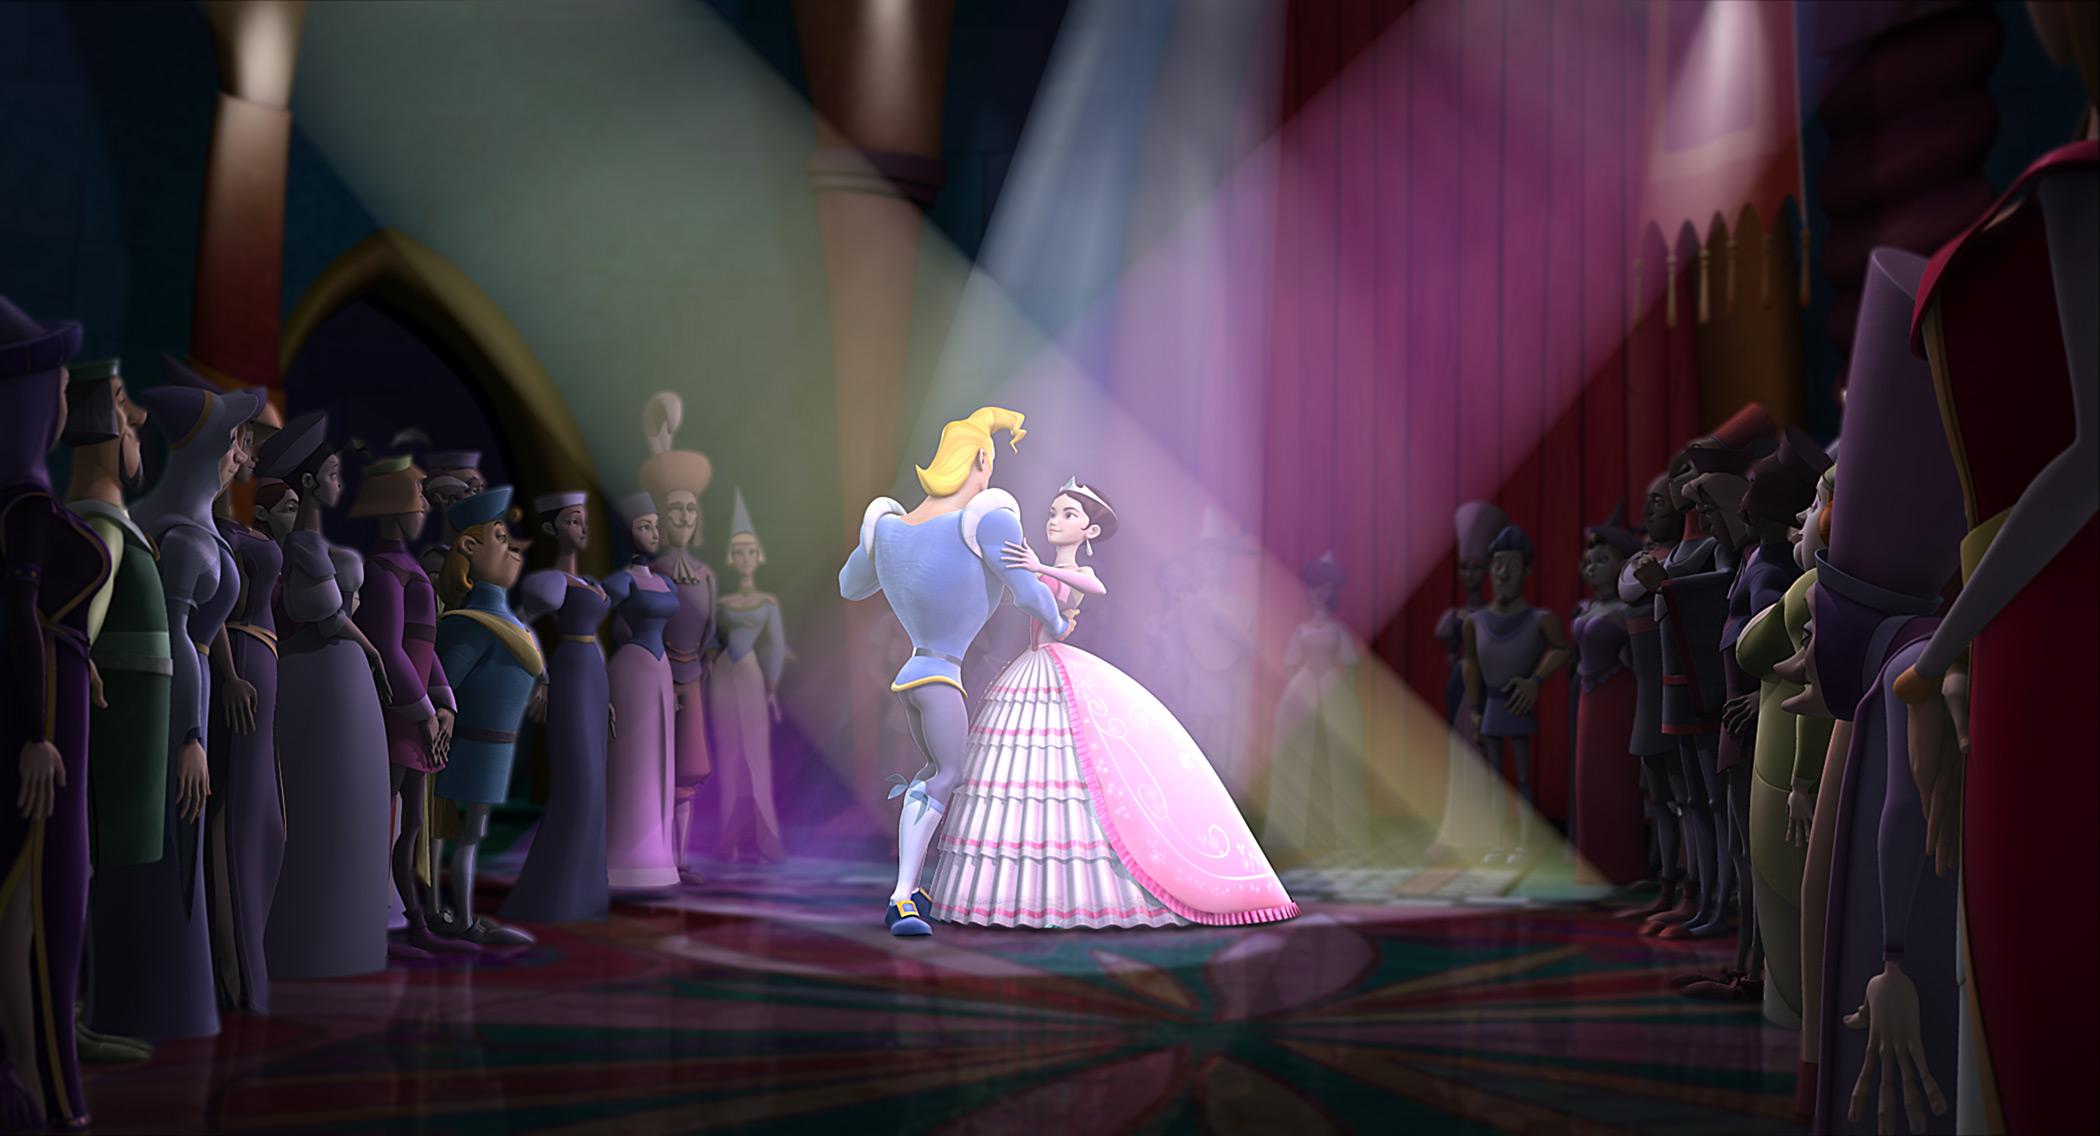 HD Wallpapers Prince Humperdink (voiced by Patrick Warburton) and Ella (voiced by Sarah Michelle Gellar) in HAPPILY N'EVER AFTER.